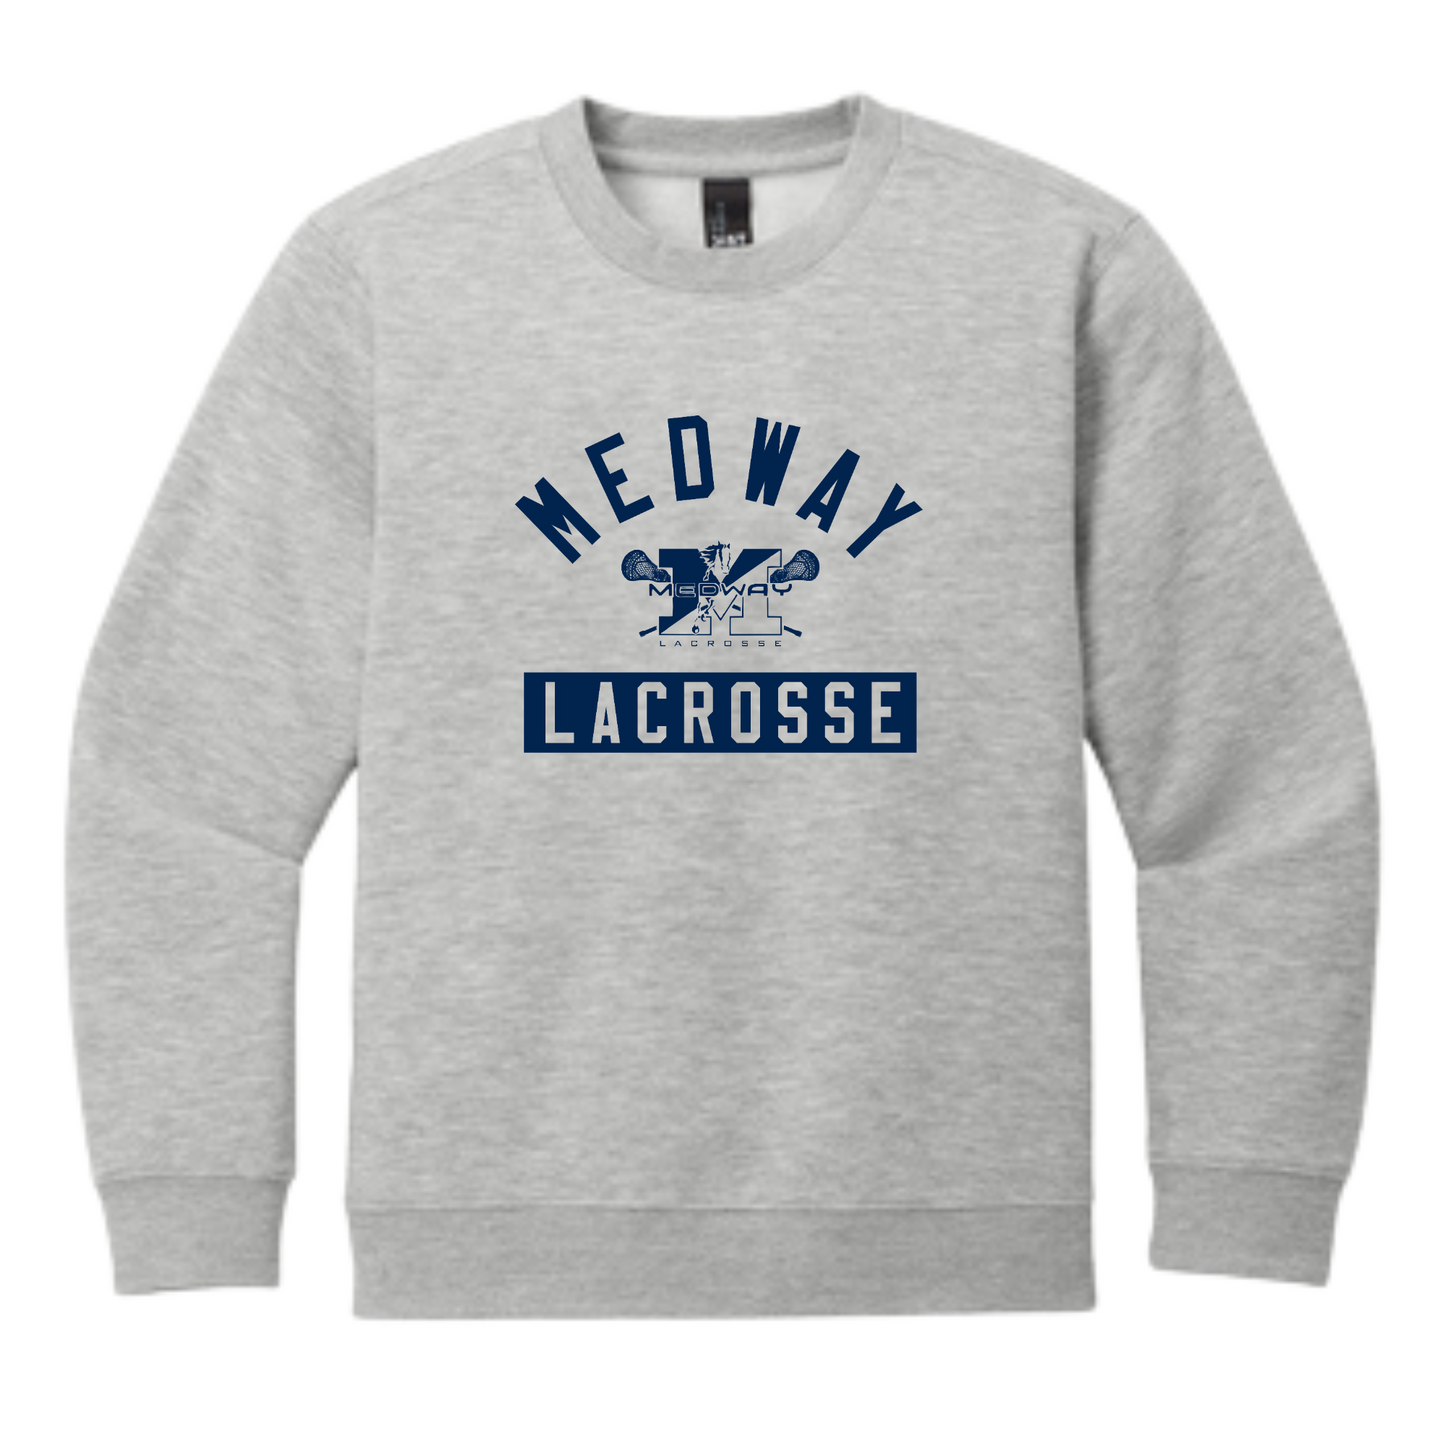 MEDWAY YOUTH LACROSSE ARCH YOUTH CREW - GRAY